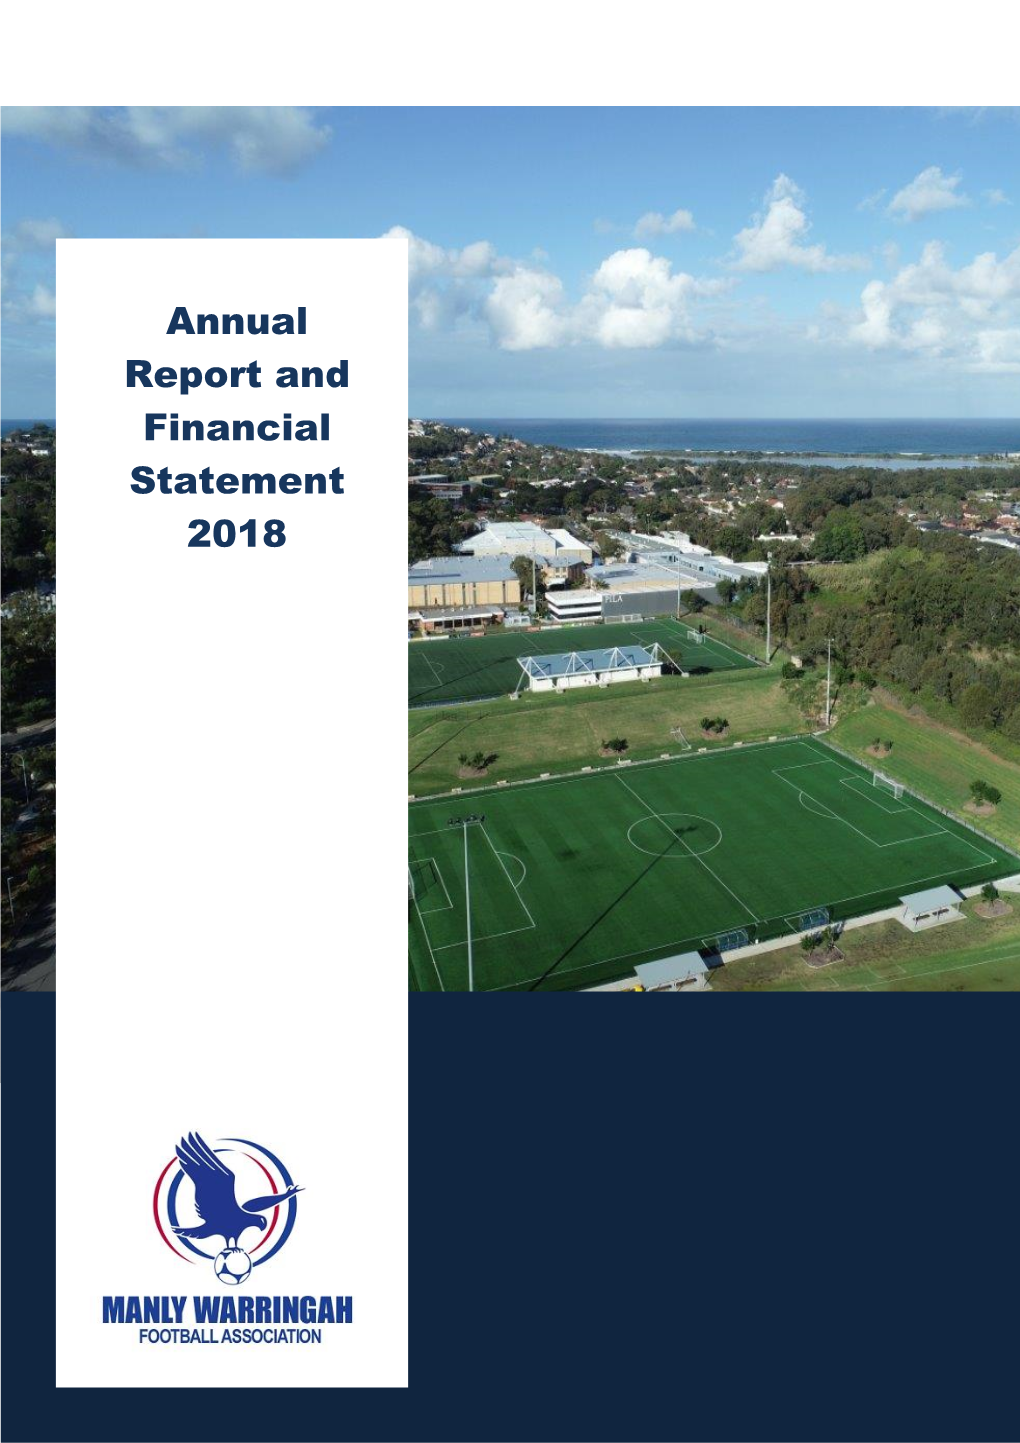 Annual Report and Financial Statement 2018